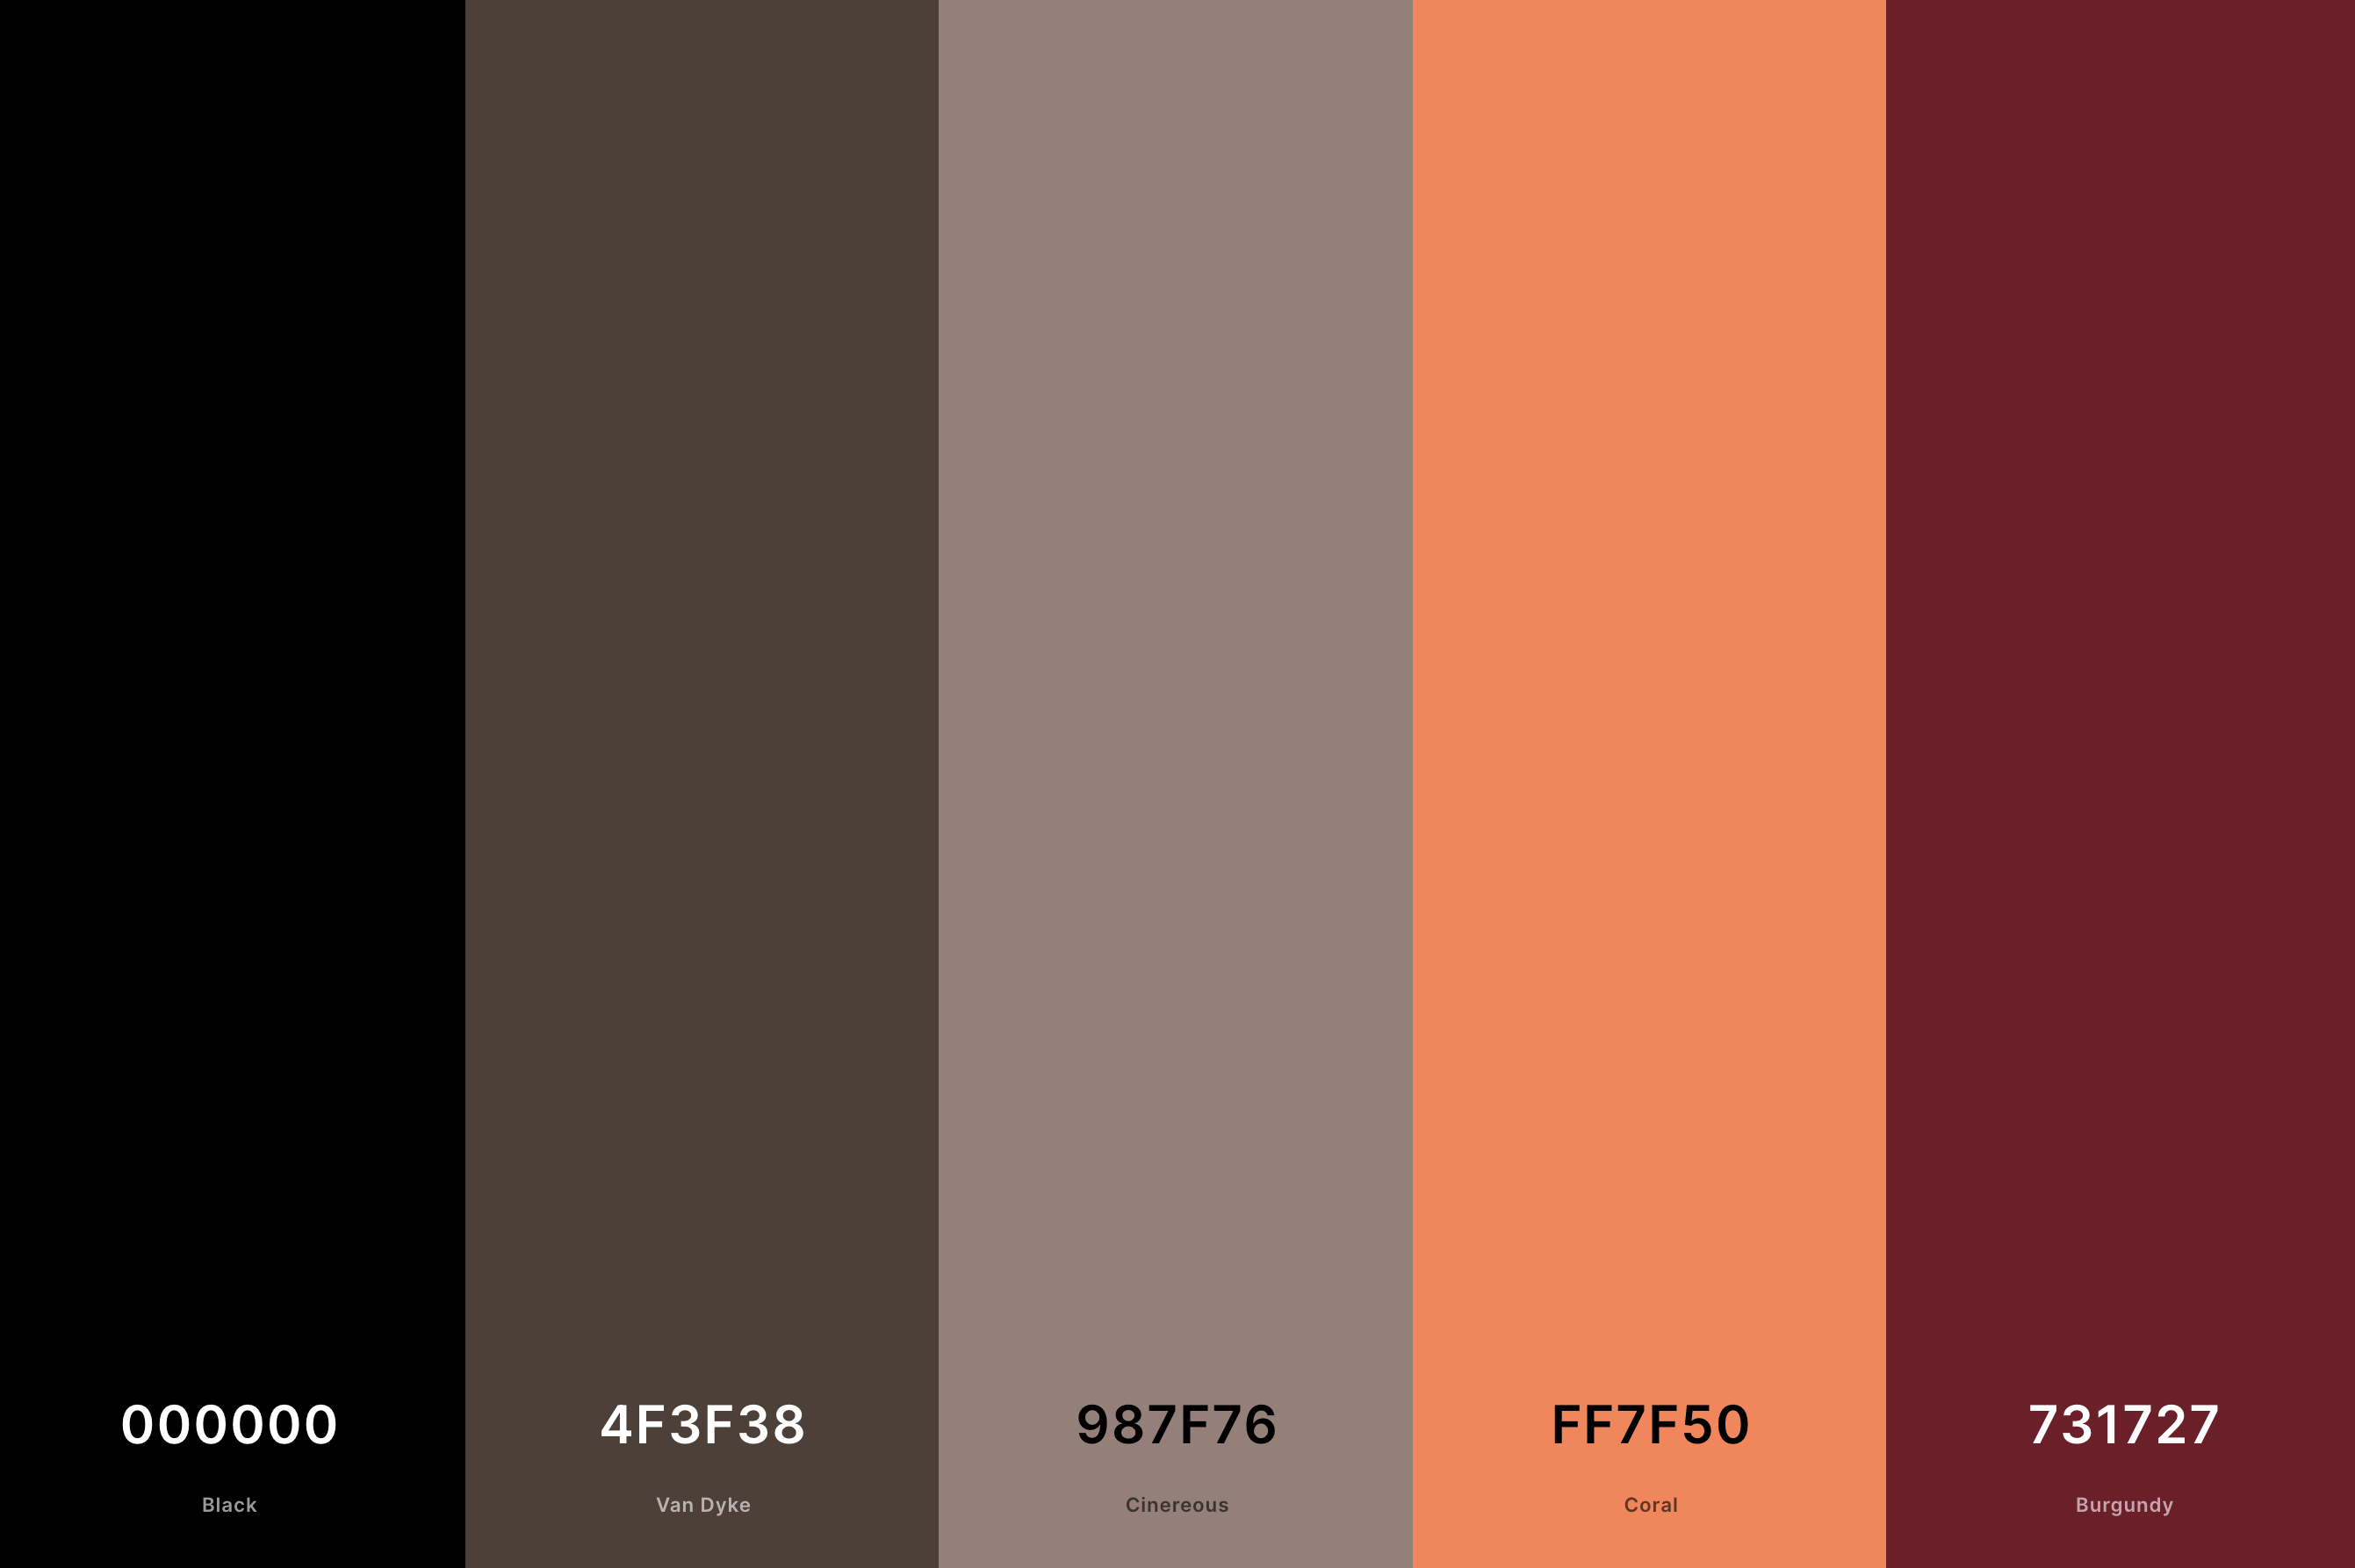 20. Black And Coral Color Palette Color Palette with Black (Hex #000000) + Van Dyke (Hex #4F3F38) + Cinereous (Hex #987F76) + Coral (Hex #FF7F50) + Burgundy (Hex #731727) Color Palette with Hex Codes